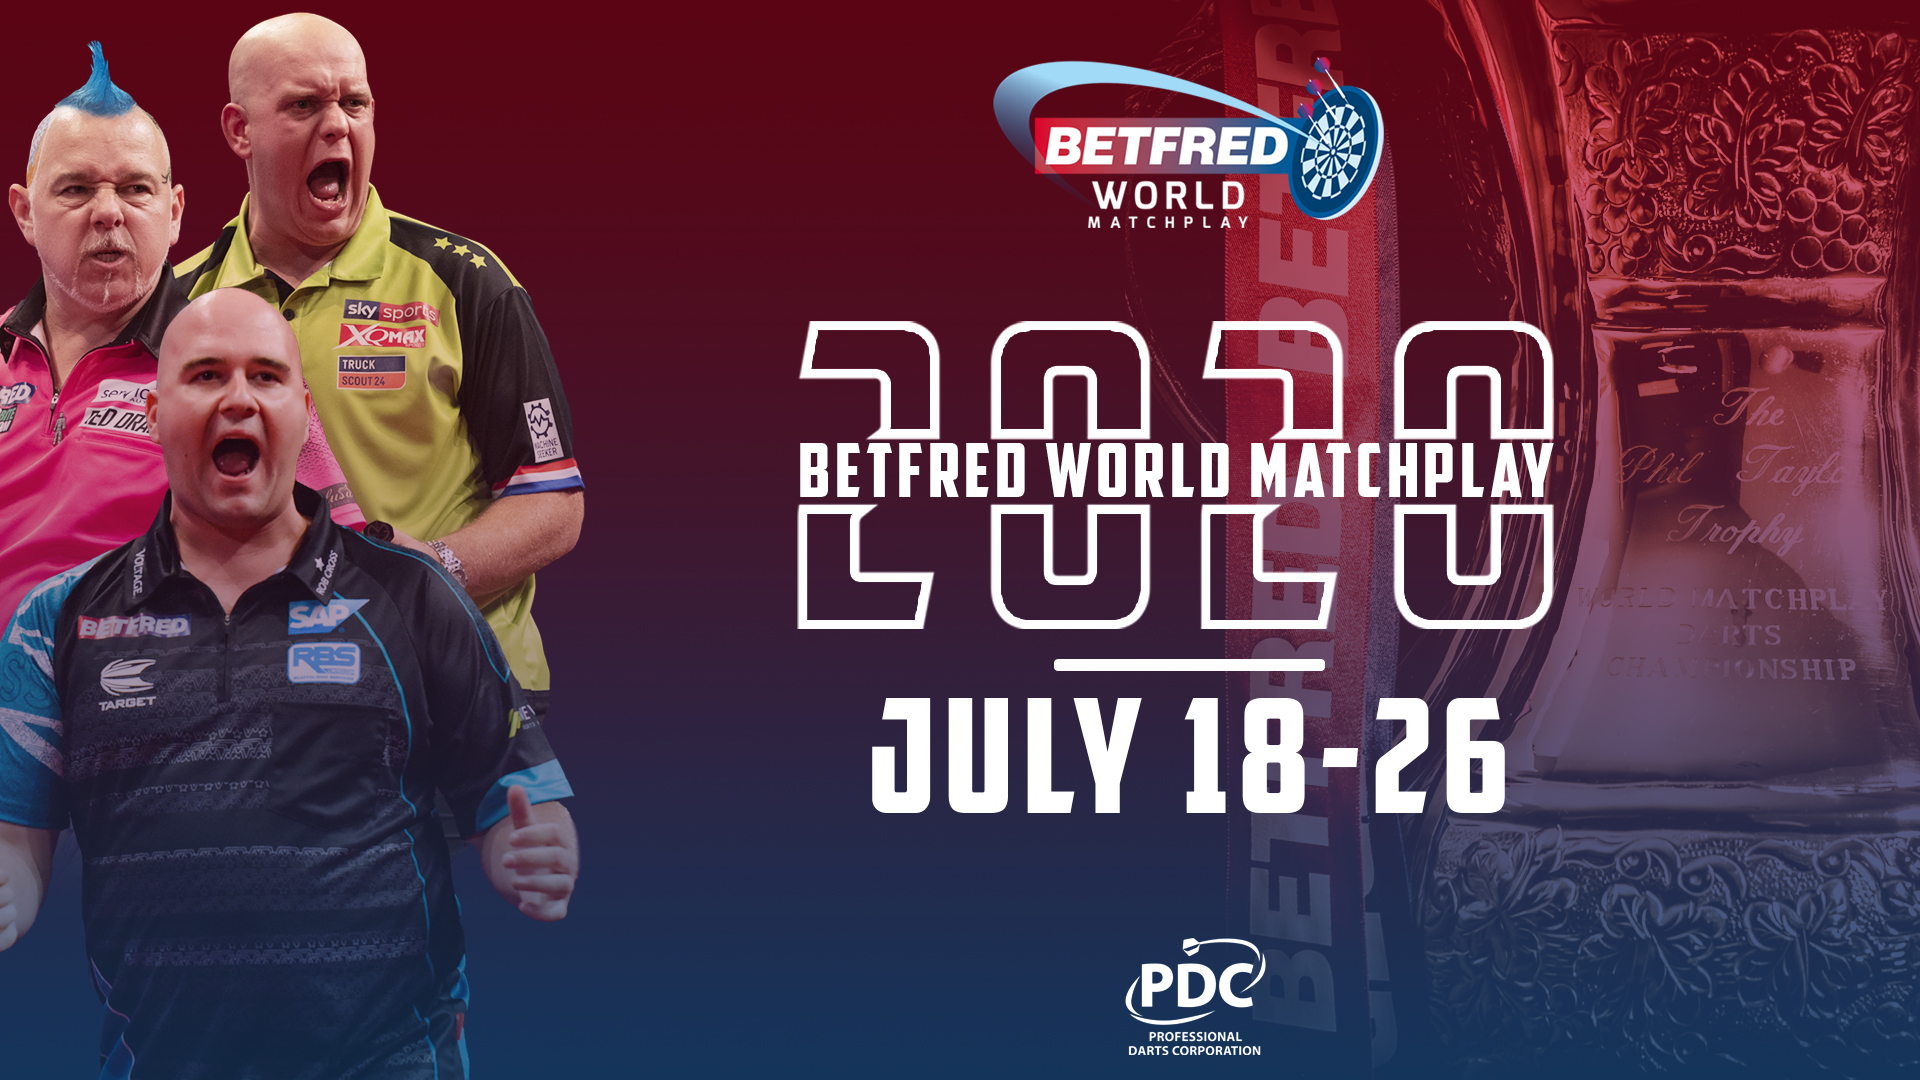 2020 Betfred World Matchplay preview PDC